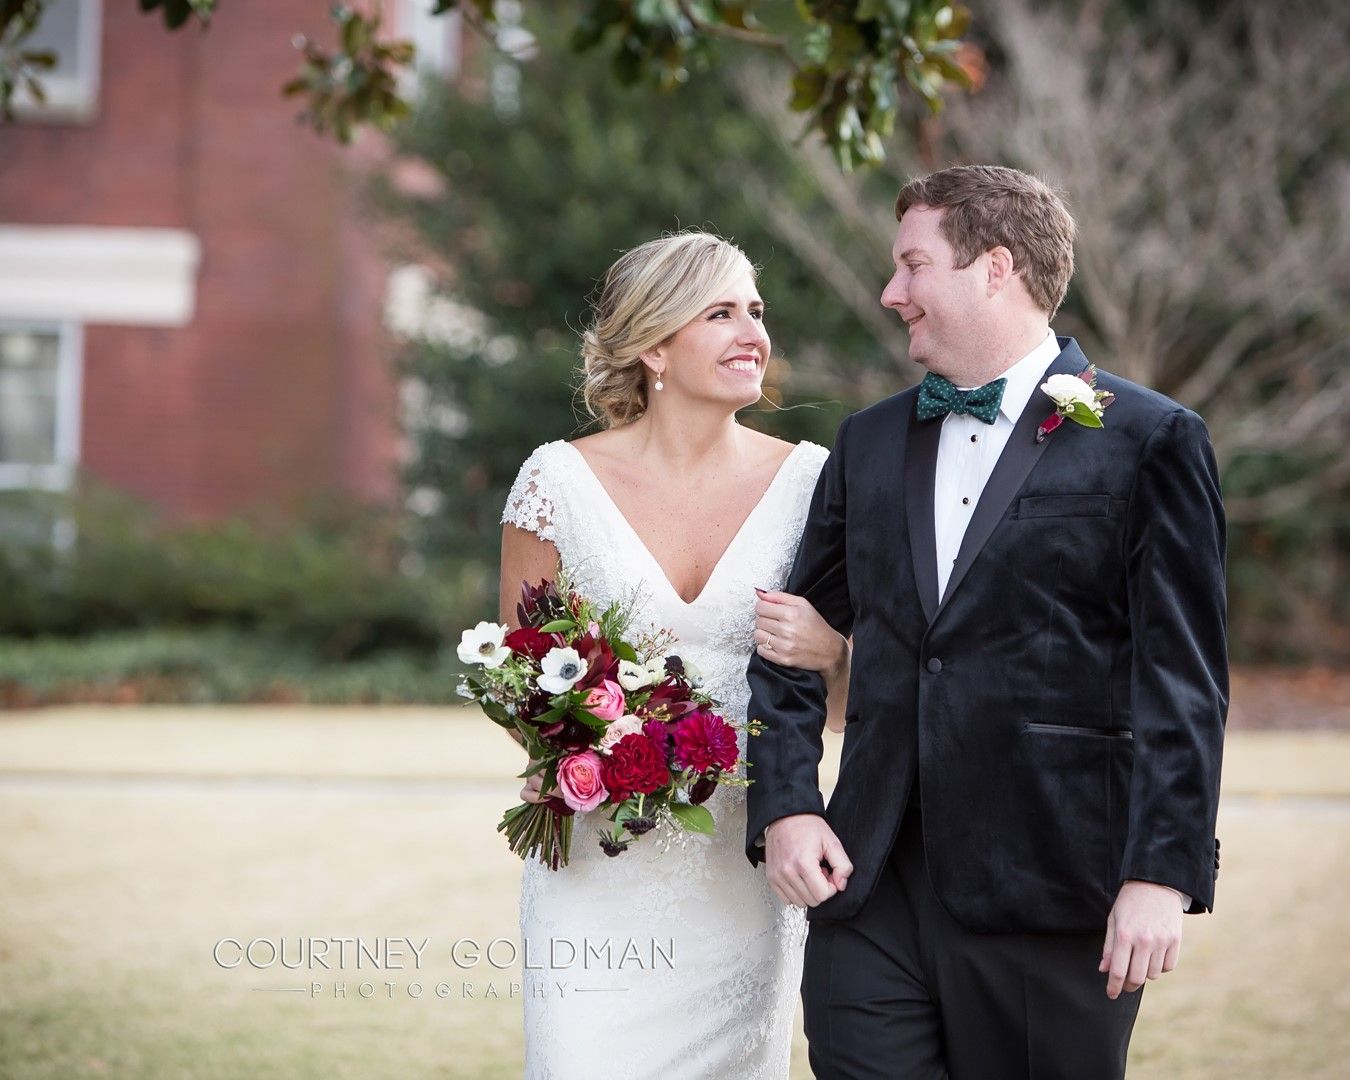 Image for post: Audrey & Todd's Athens Wedding